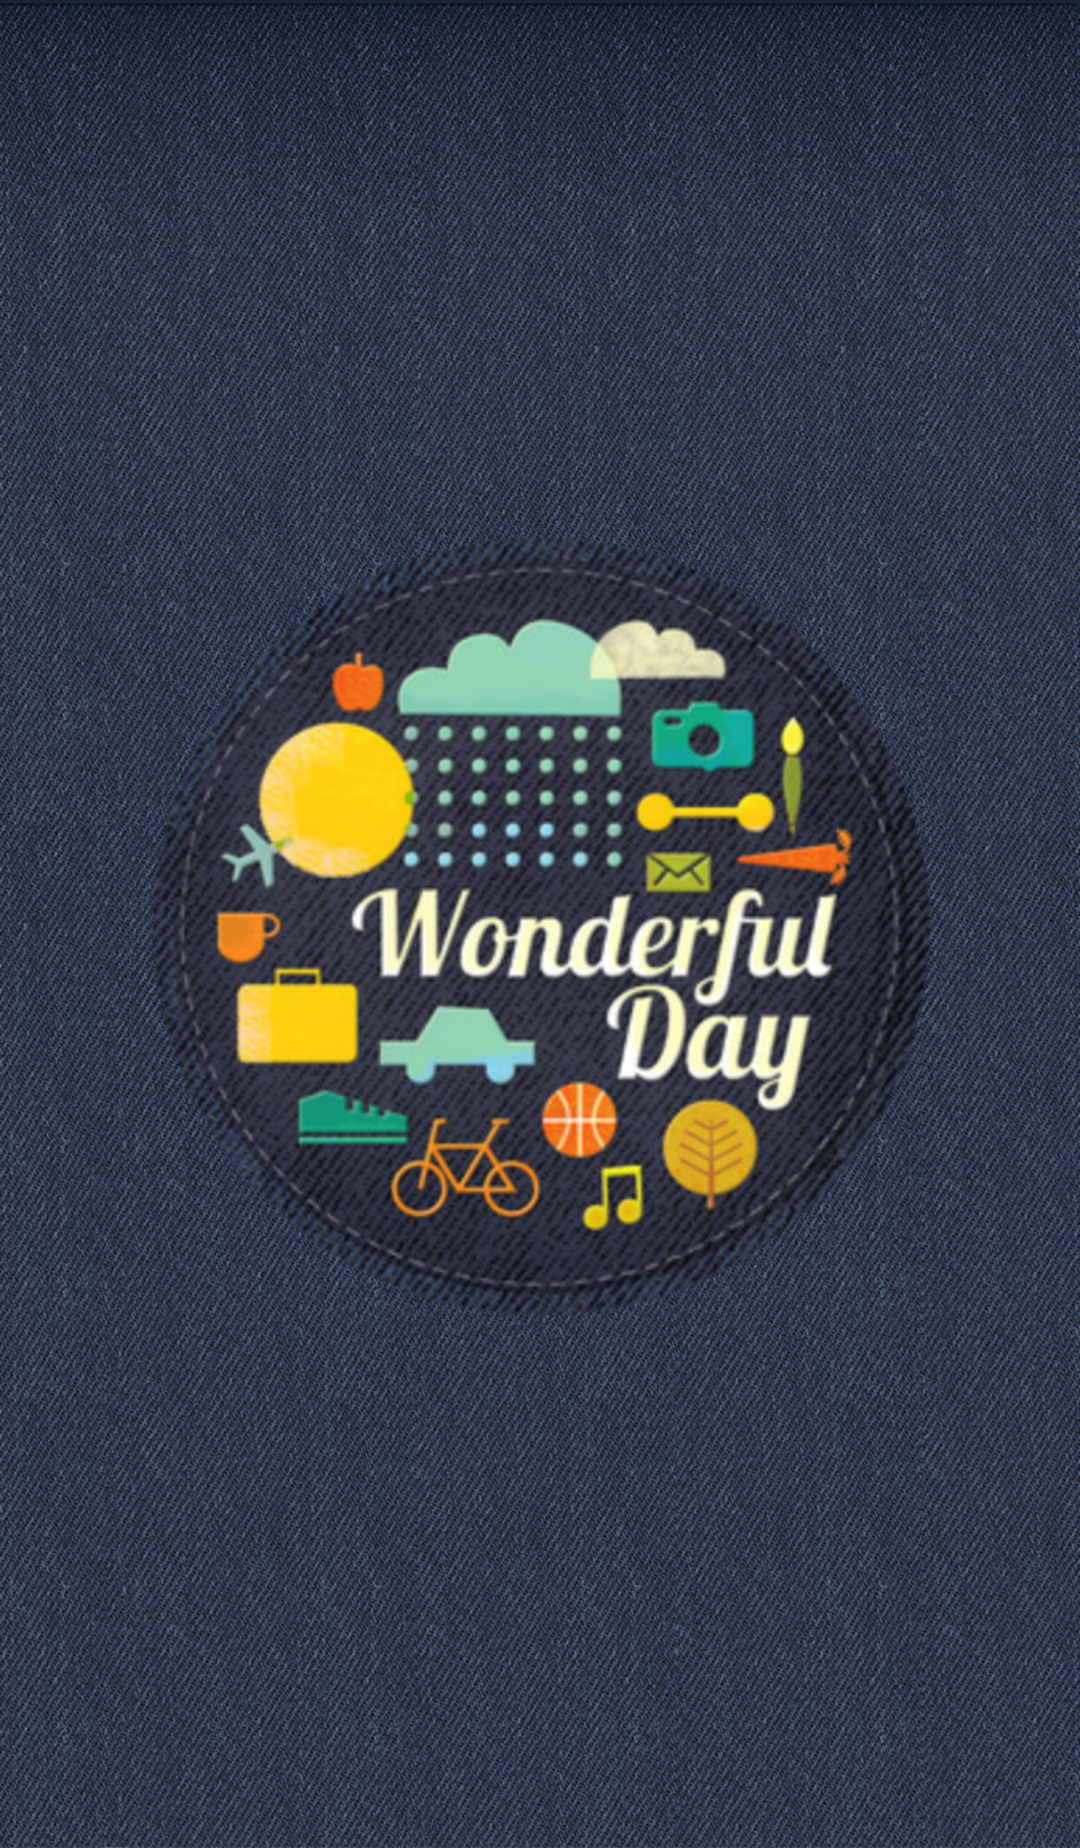 Android application Wonderful Day screenshort